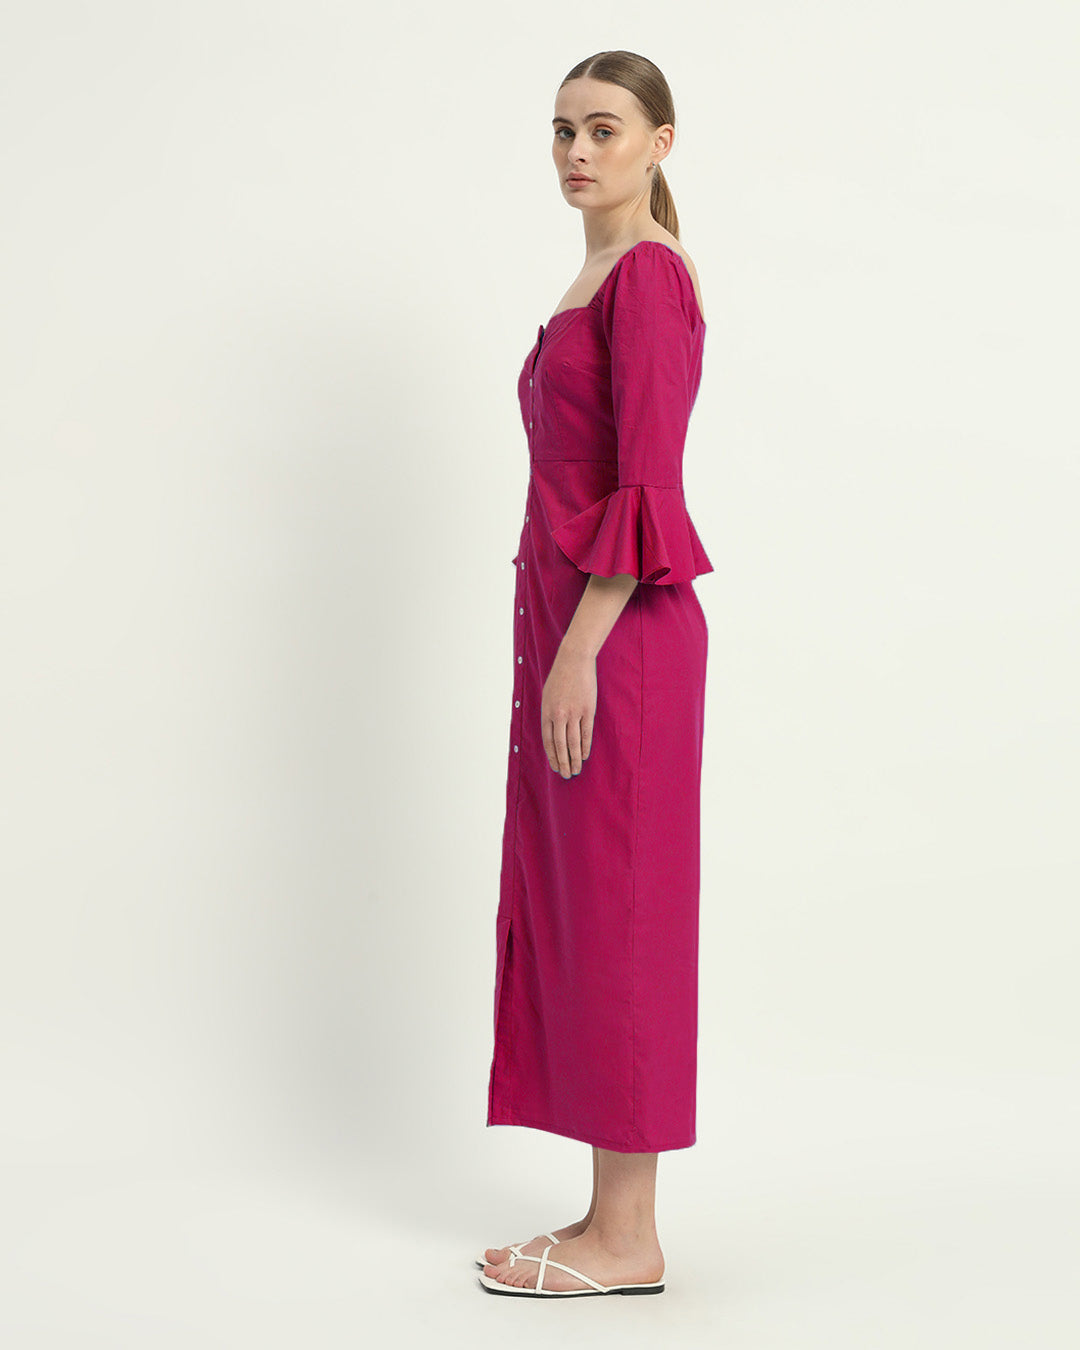 The Rosendale Berry Cotton Dress